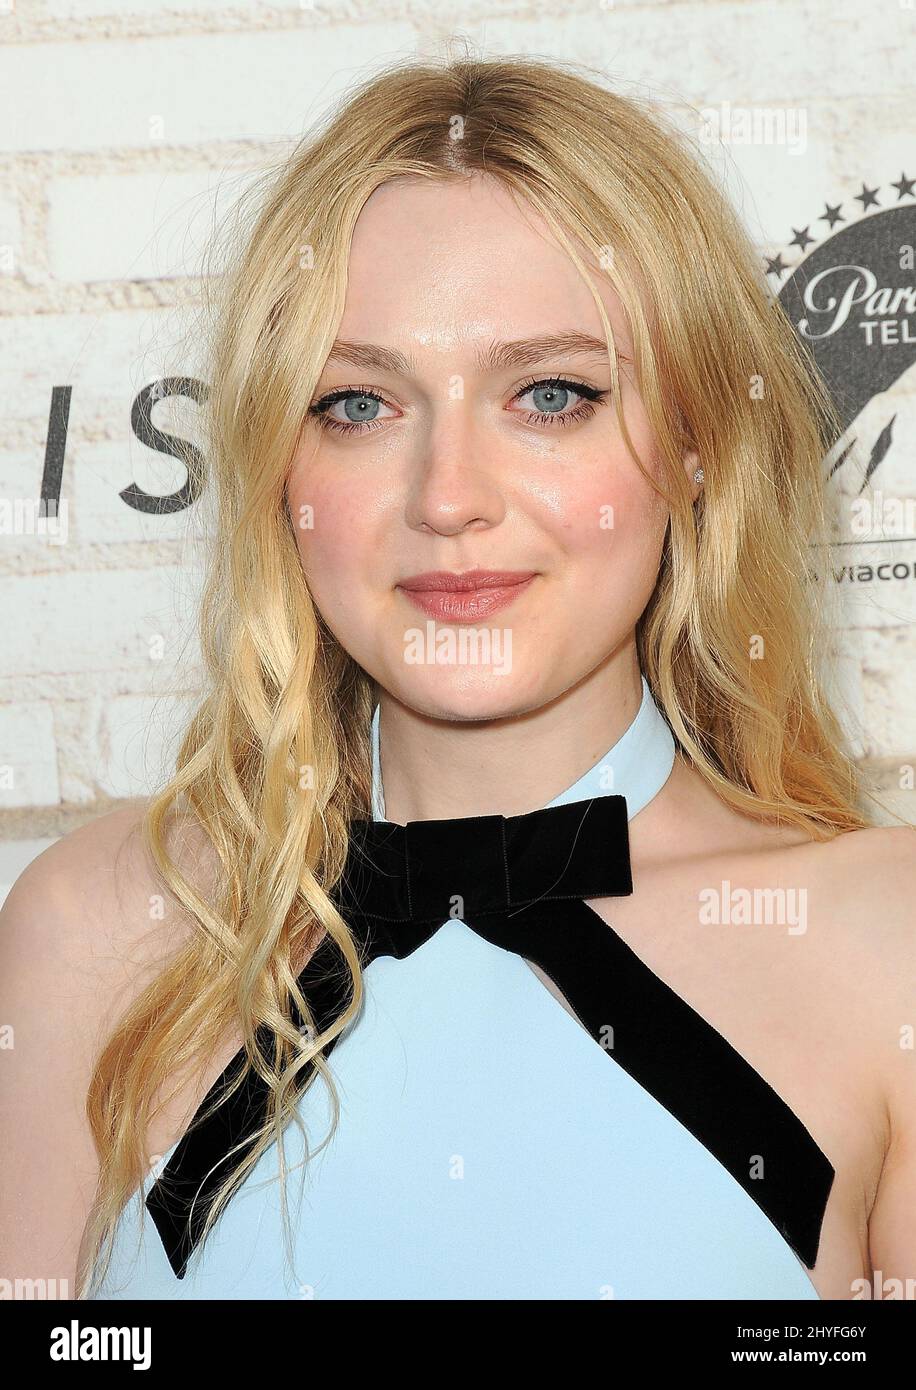 Dakota Fanning attending the NT's 'The Alienist' FYC event held at the Wallis Annenberg Center, CA on May 23, 2018. Stock Photo